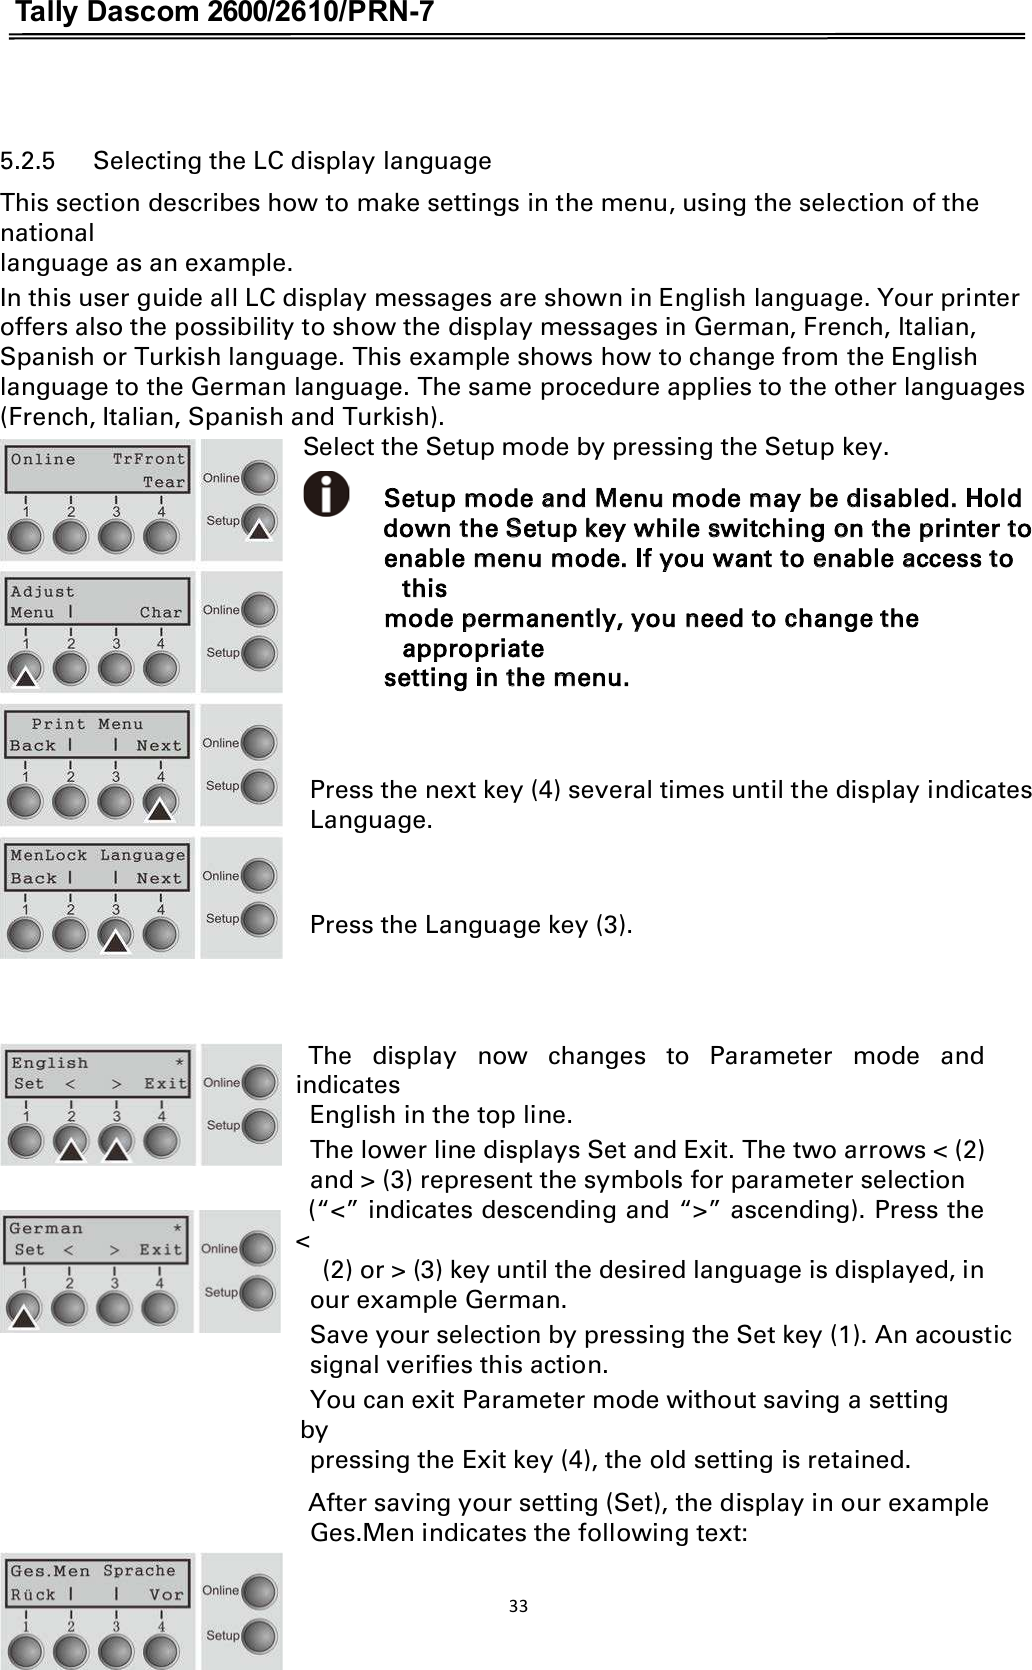 Tally Dascom 2600/2610/PRN-7   5.2.5      Selecting the LC display language This section describes how to make settings in the menu, using the selection of the national language as an example. In this user guide all LC display messages are shown in English language. Your printer offers also the possibility to show the display messages in German, French, Italian, Spanish or Turkish language. This example shows how to change from the English language to the German language. The same procedure applies to the other languages (French, Italian, Spanish and Turkish).                                                           Select the Setup mode by pressing the Setup key.                                                            Setup mode and Menu mode may be disabled. Hold  down the Setup key while switching on the printer to enable menu mode. If you want to enable access to this mode permanently, you need to change the appropriate setting in the menu.   Press the next key (4) several times until the display indicates Language.     Press the Language key (3).                                                 The  display  now  changes  to  Parameter  mode  and indicates   English in the top line. The lower line displays Set and Exit. The two arrows &lt; (2)   and &gt; (3) represent the symbols for parameter selection   (“&lt;” indicates descending and “&gt;” ascending). Press the &lt;     (2) or &gt; (3) key until the desired language is displayed, in   our example German. Save your selection by pressing the Set key (1). An acoustic   signal verifies this action. You can exit Parameter mode without saving a setting by   pressing the Exit key (4), the old setting is retained. After saving your setting (Set), the display in our example Ges.Men indicates the following text:  33  